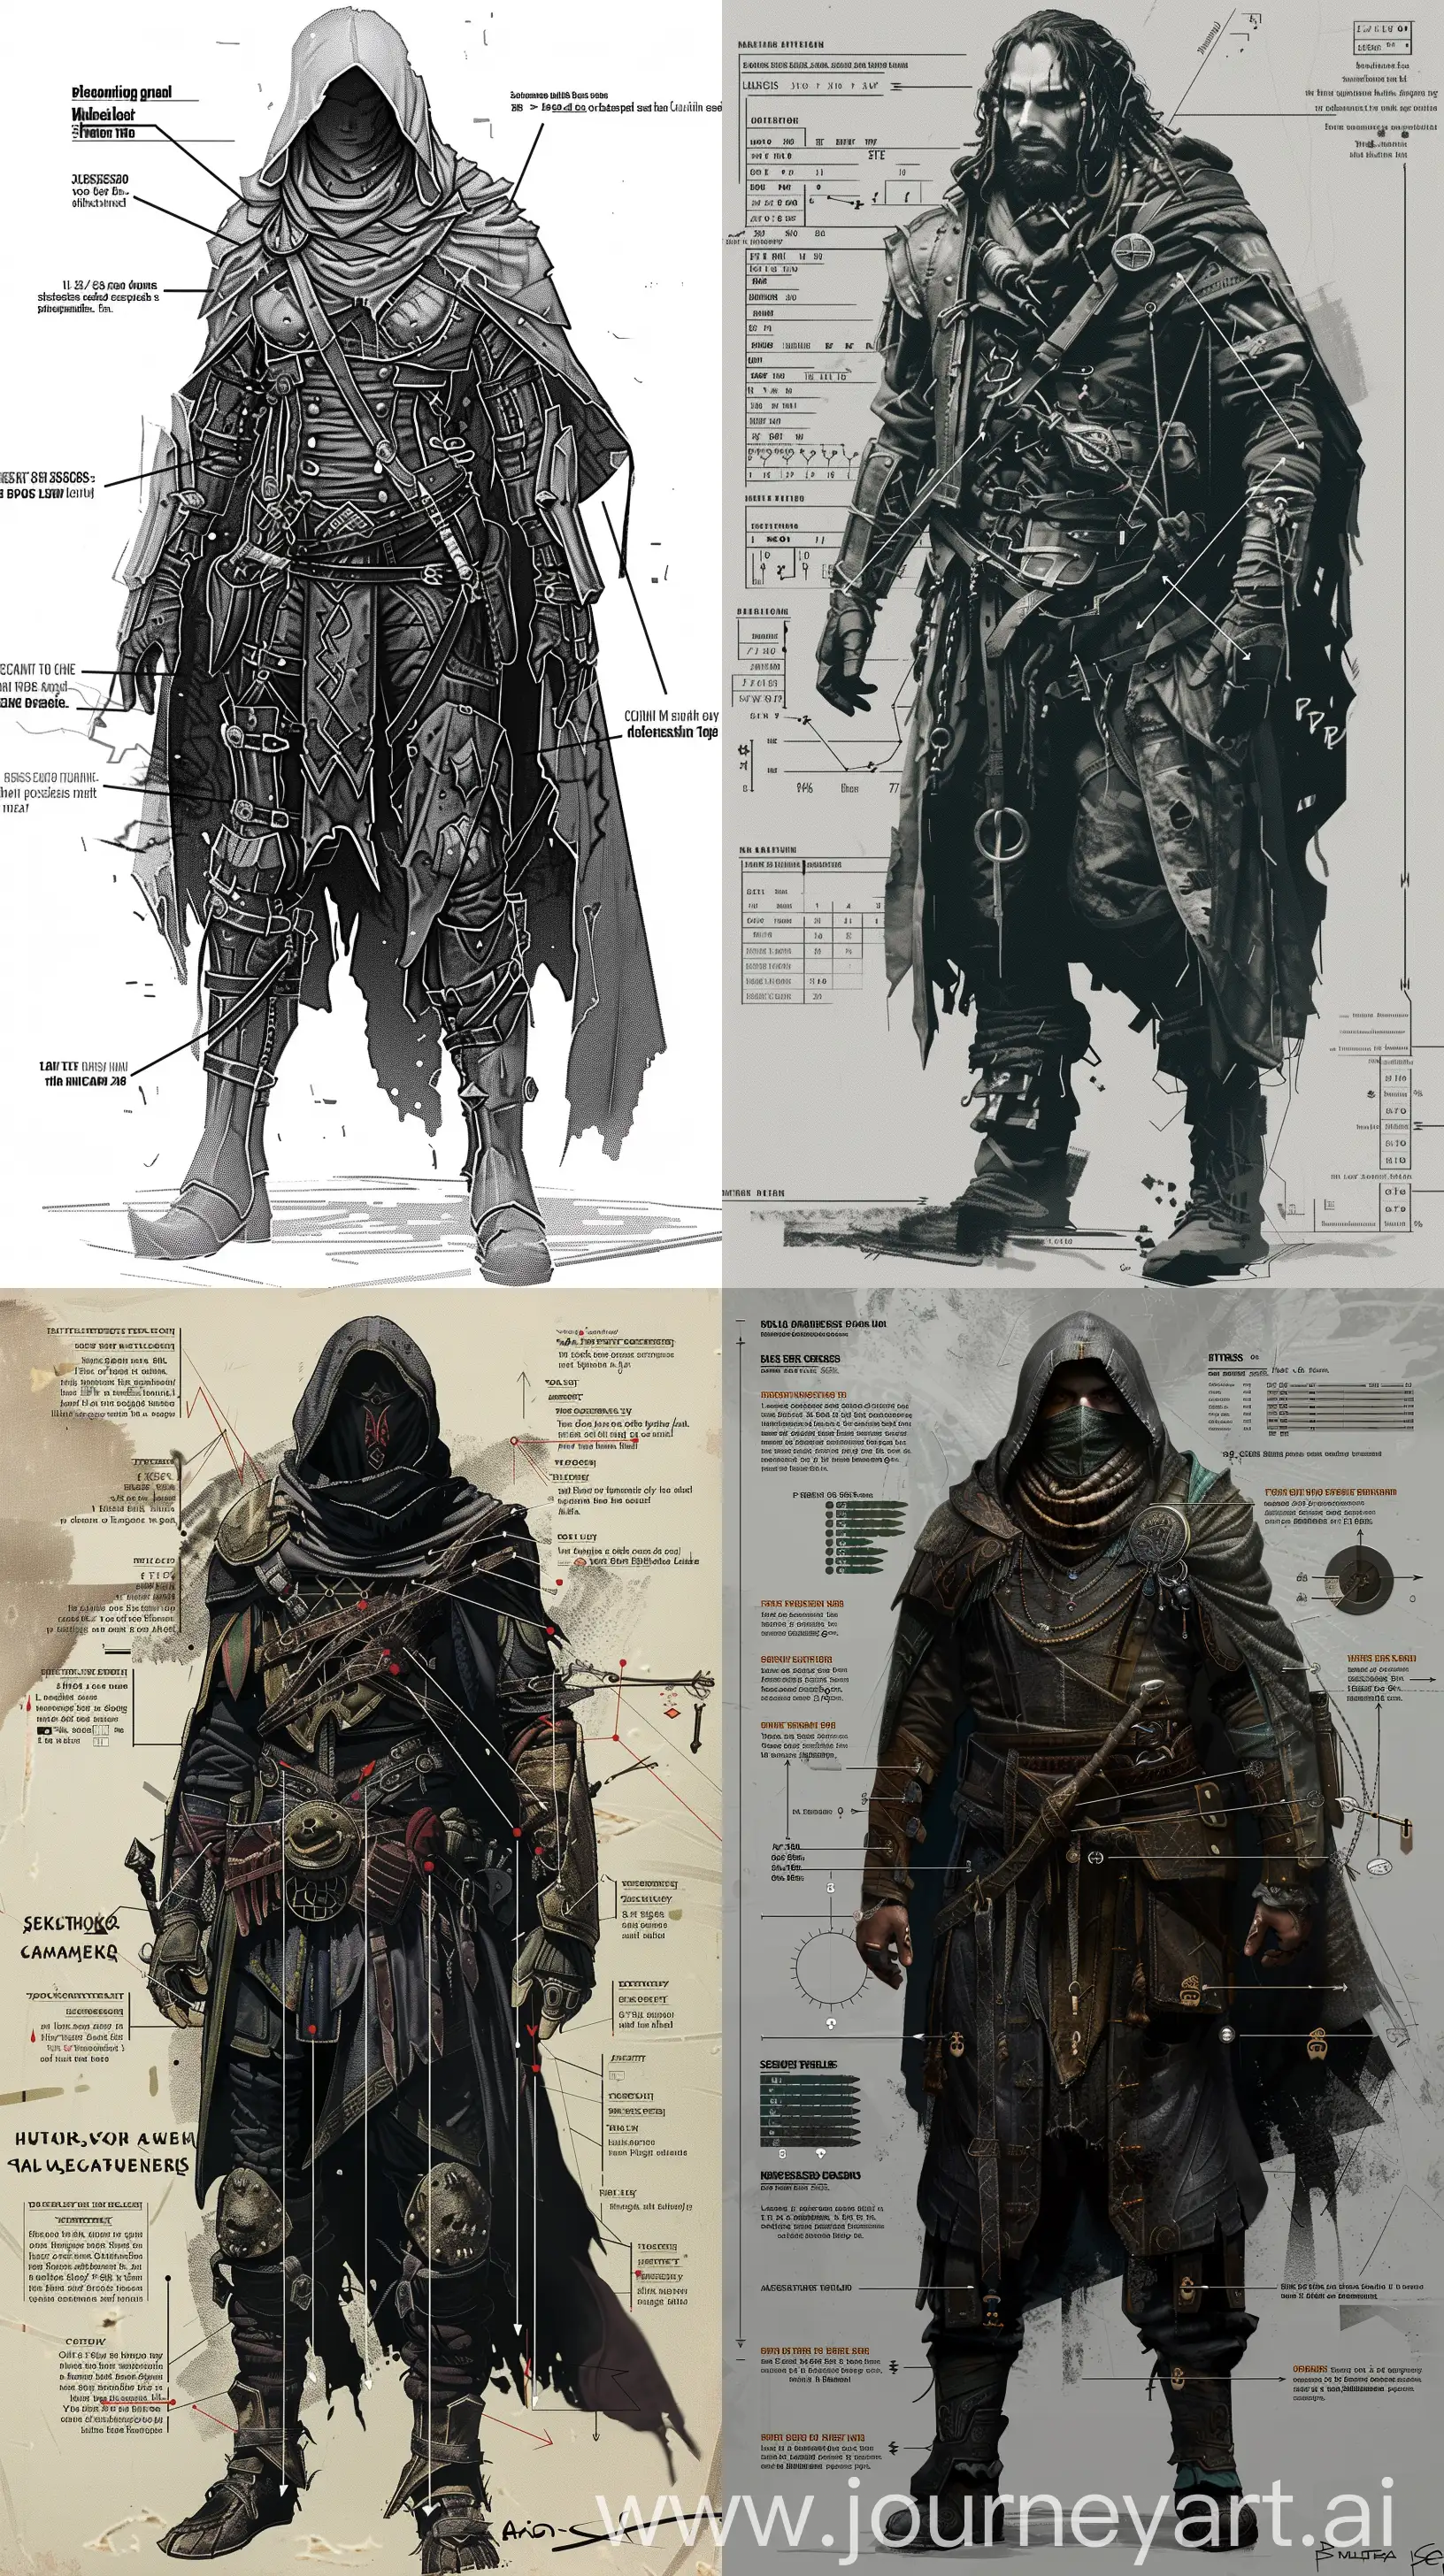  magazine, statistics, lines pointing to clothing and gear, detailed character from a dark, high epic fantasy, lots of details, graphs —ar 9:16